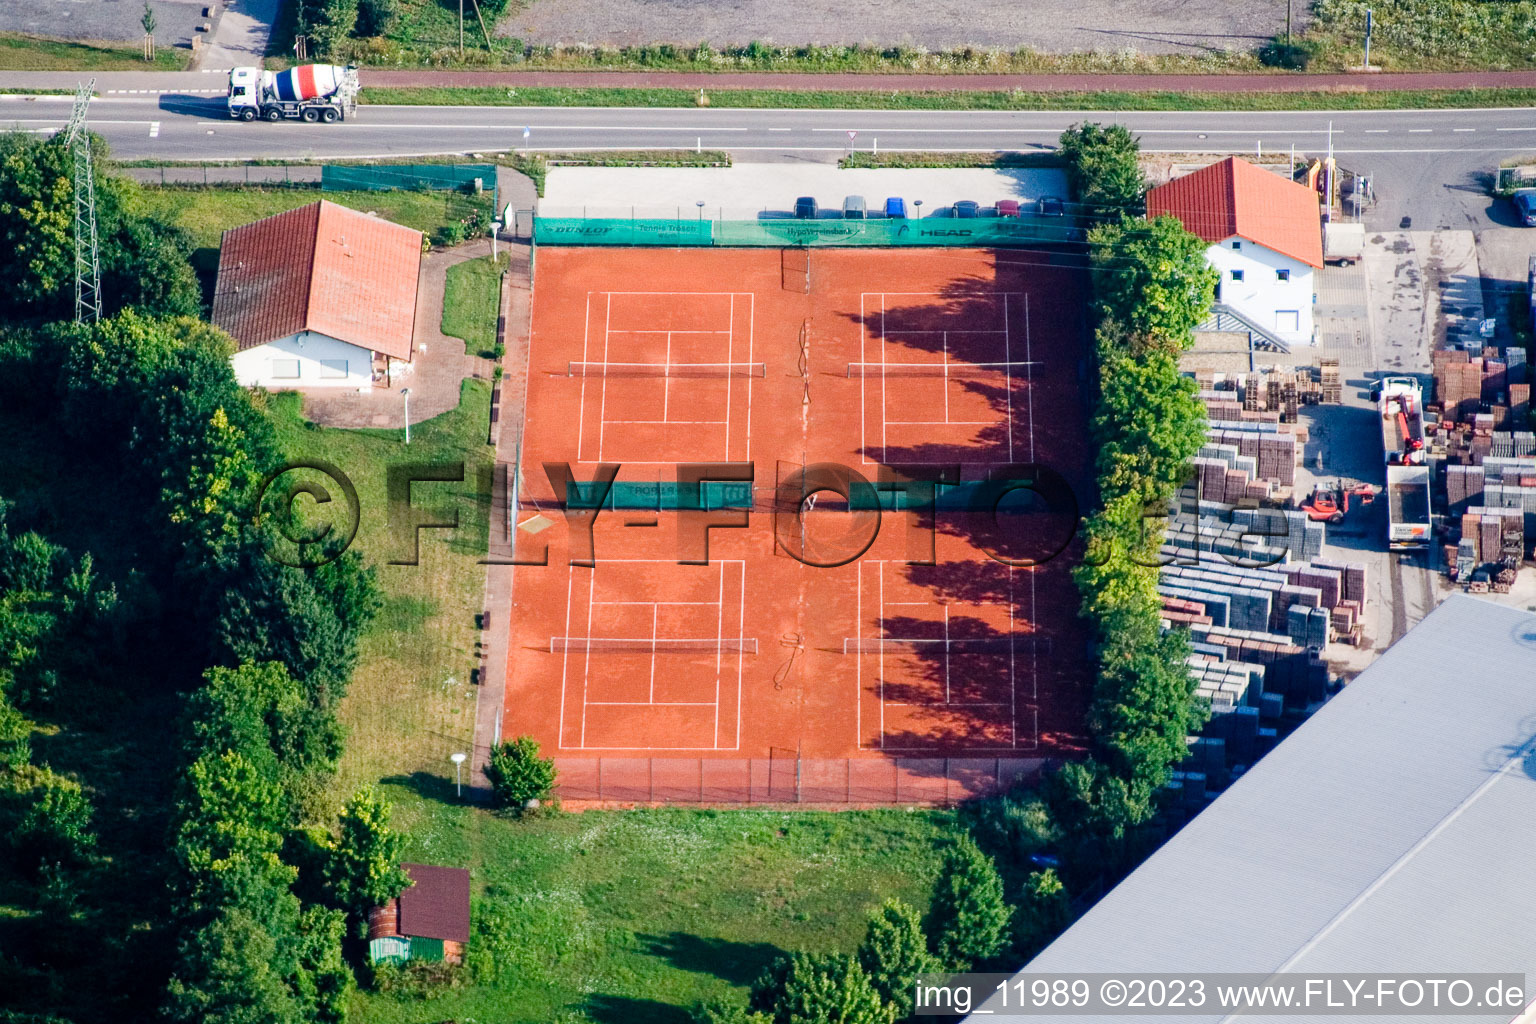 Aerial view of Tennis club in Rohrbach in the state Rhineland-Palatinate, Germany